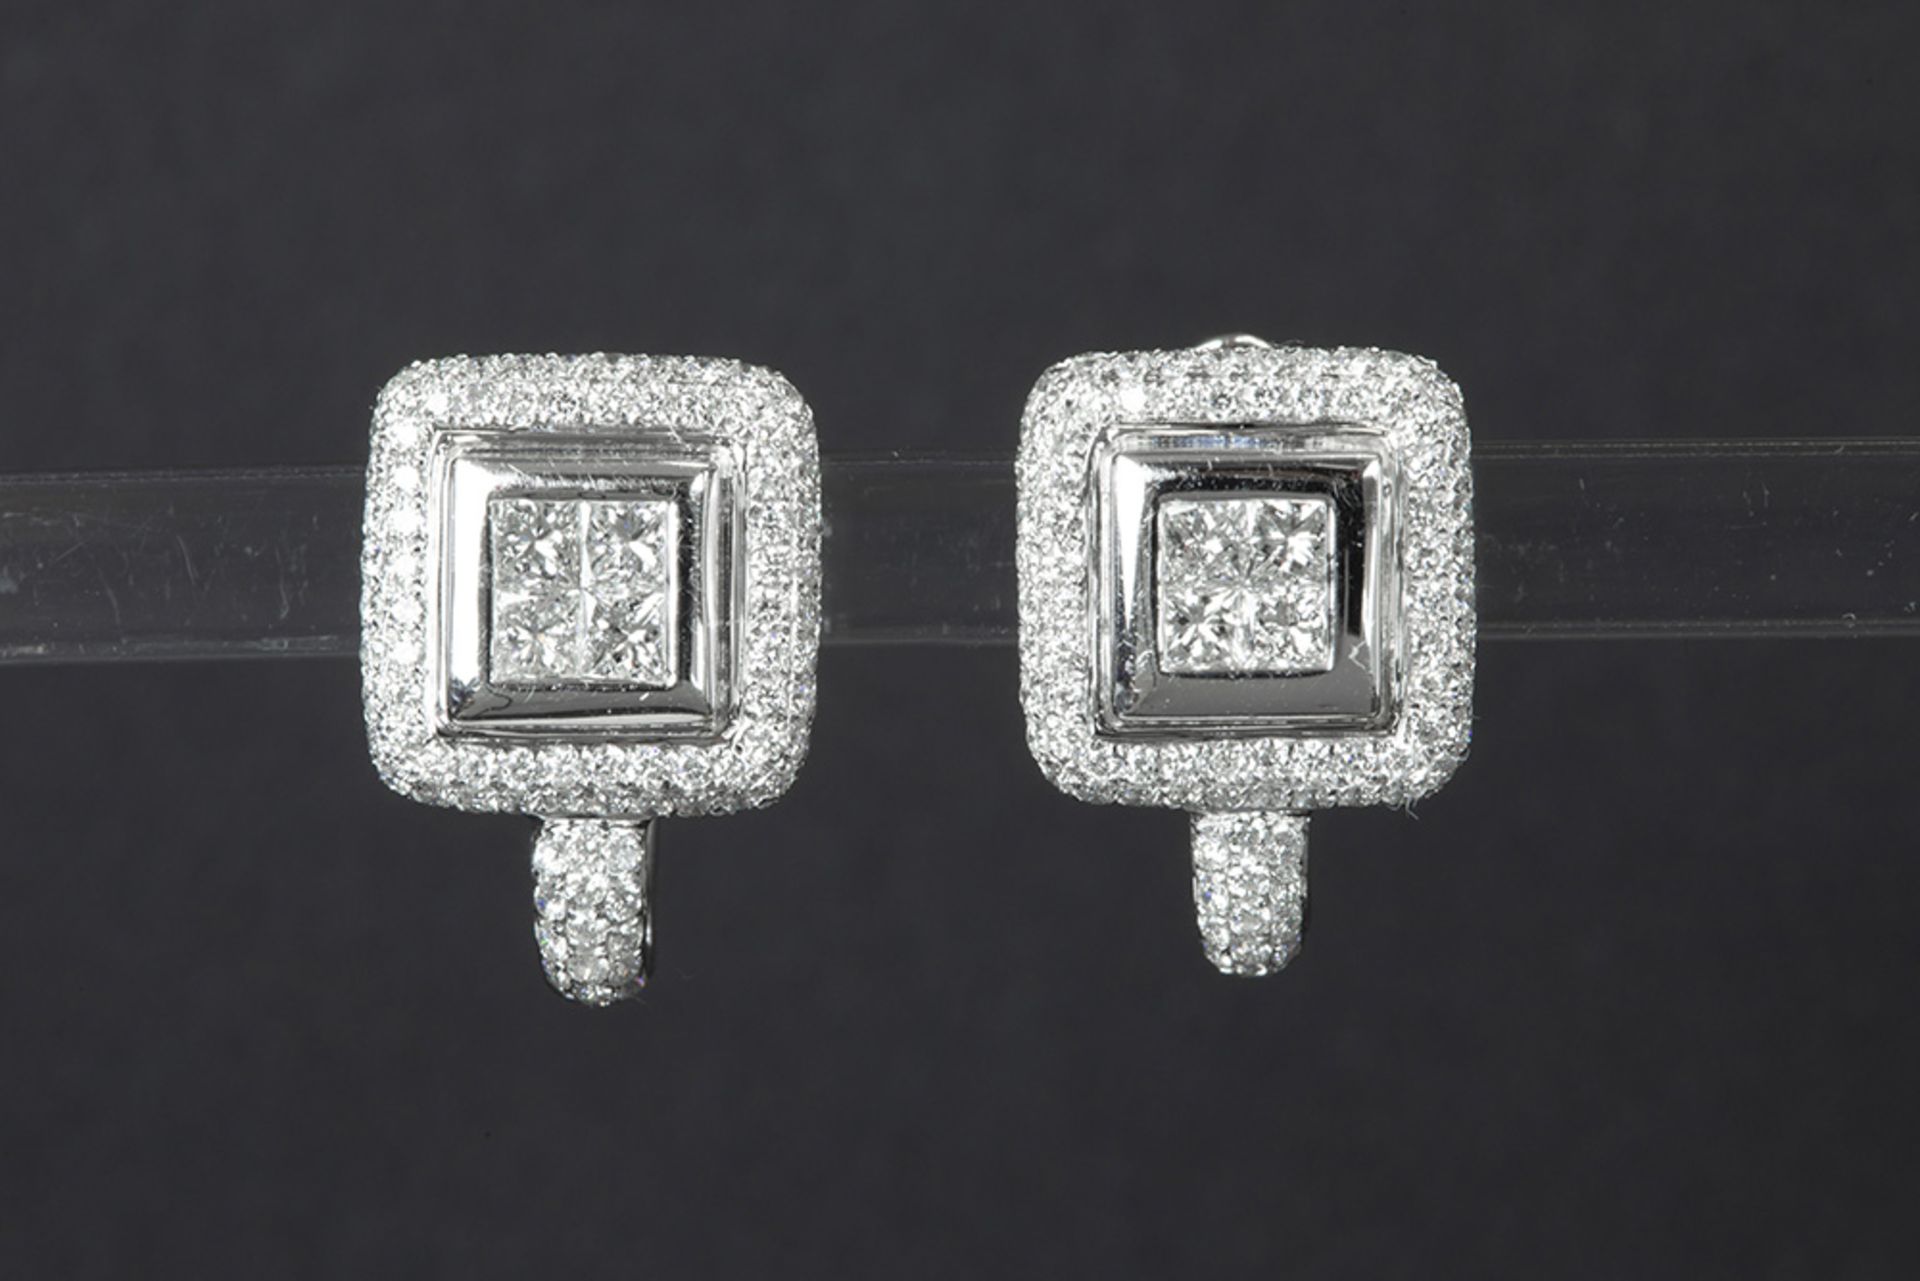 nice pair of earrings in white gold (18 carat) with 1,66 carat of very high quality princess' and